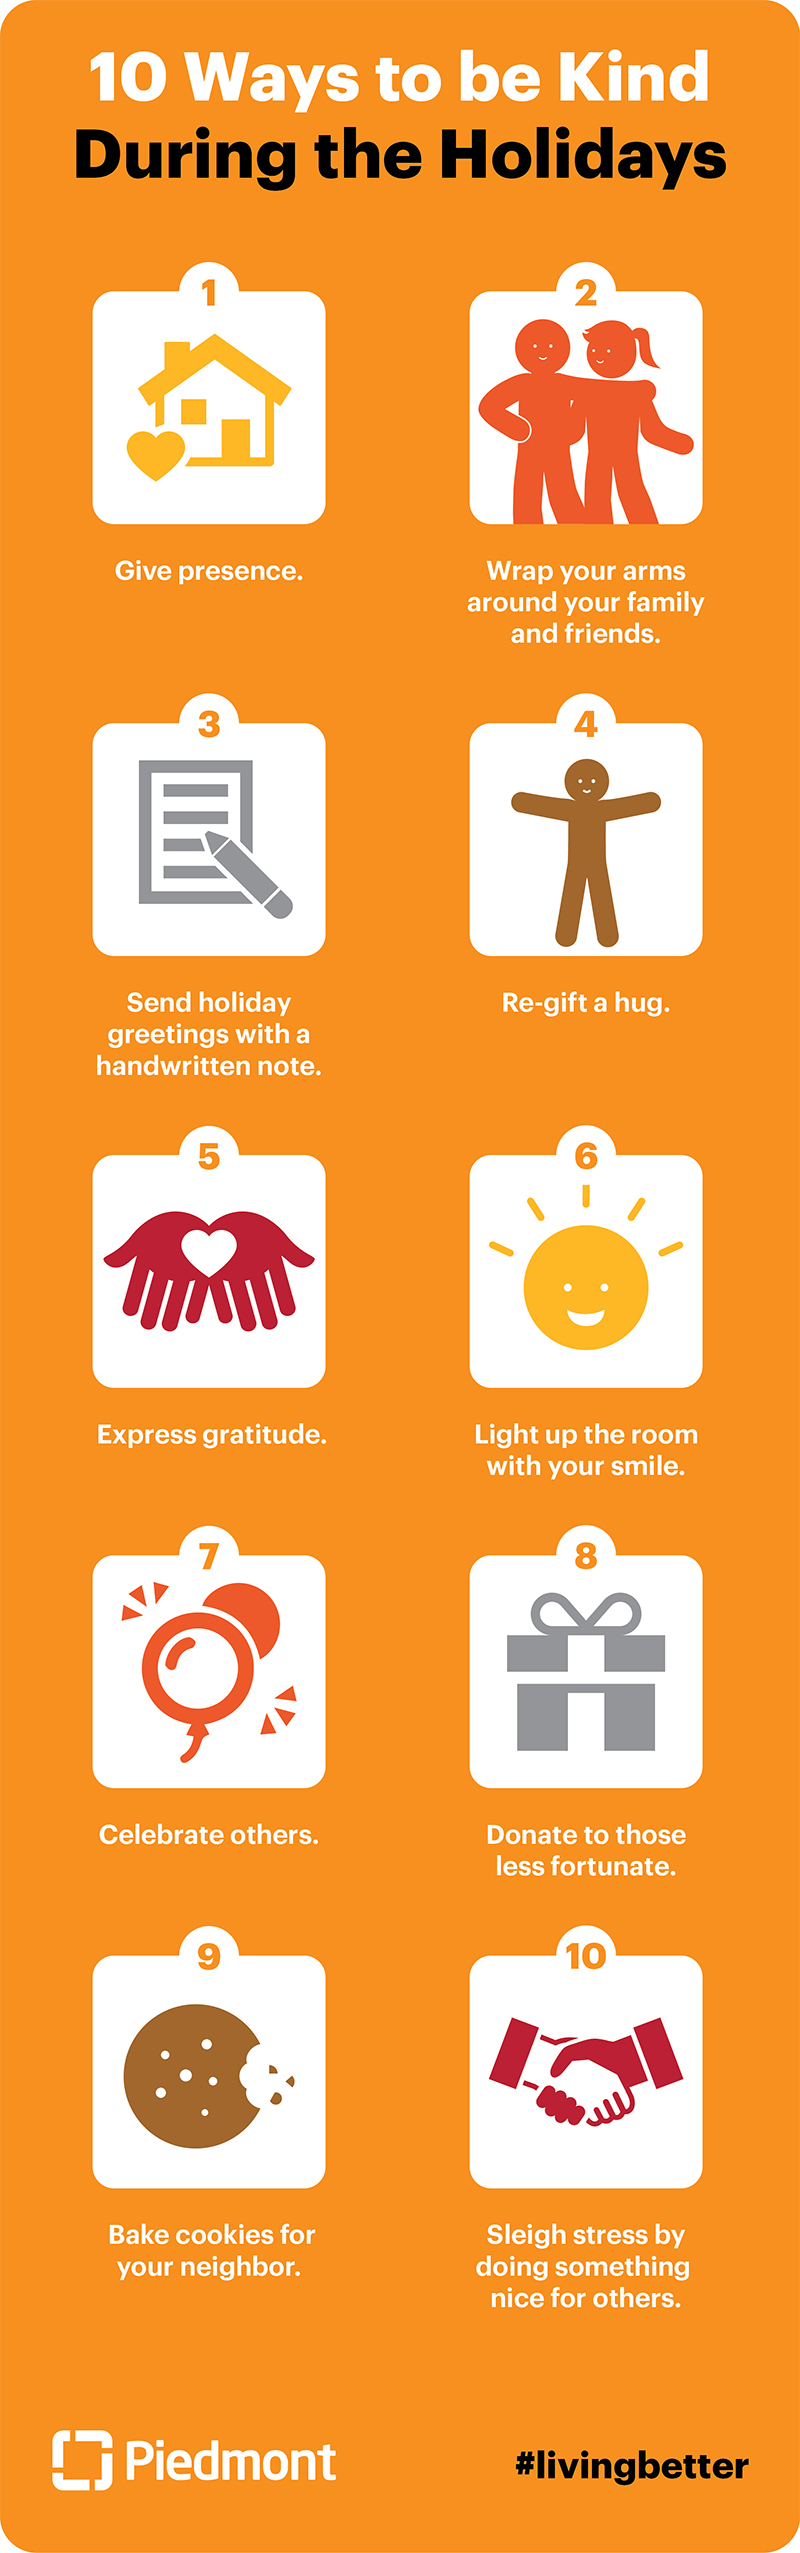 10 ways to be kind during the holidays